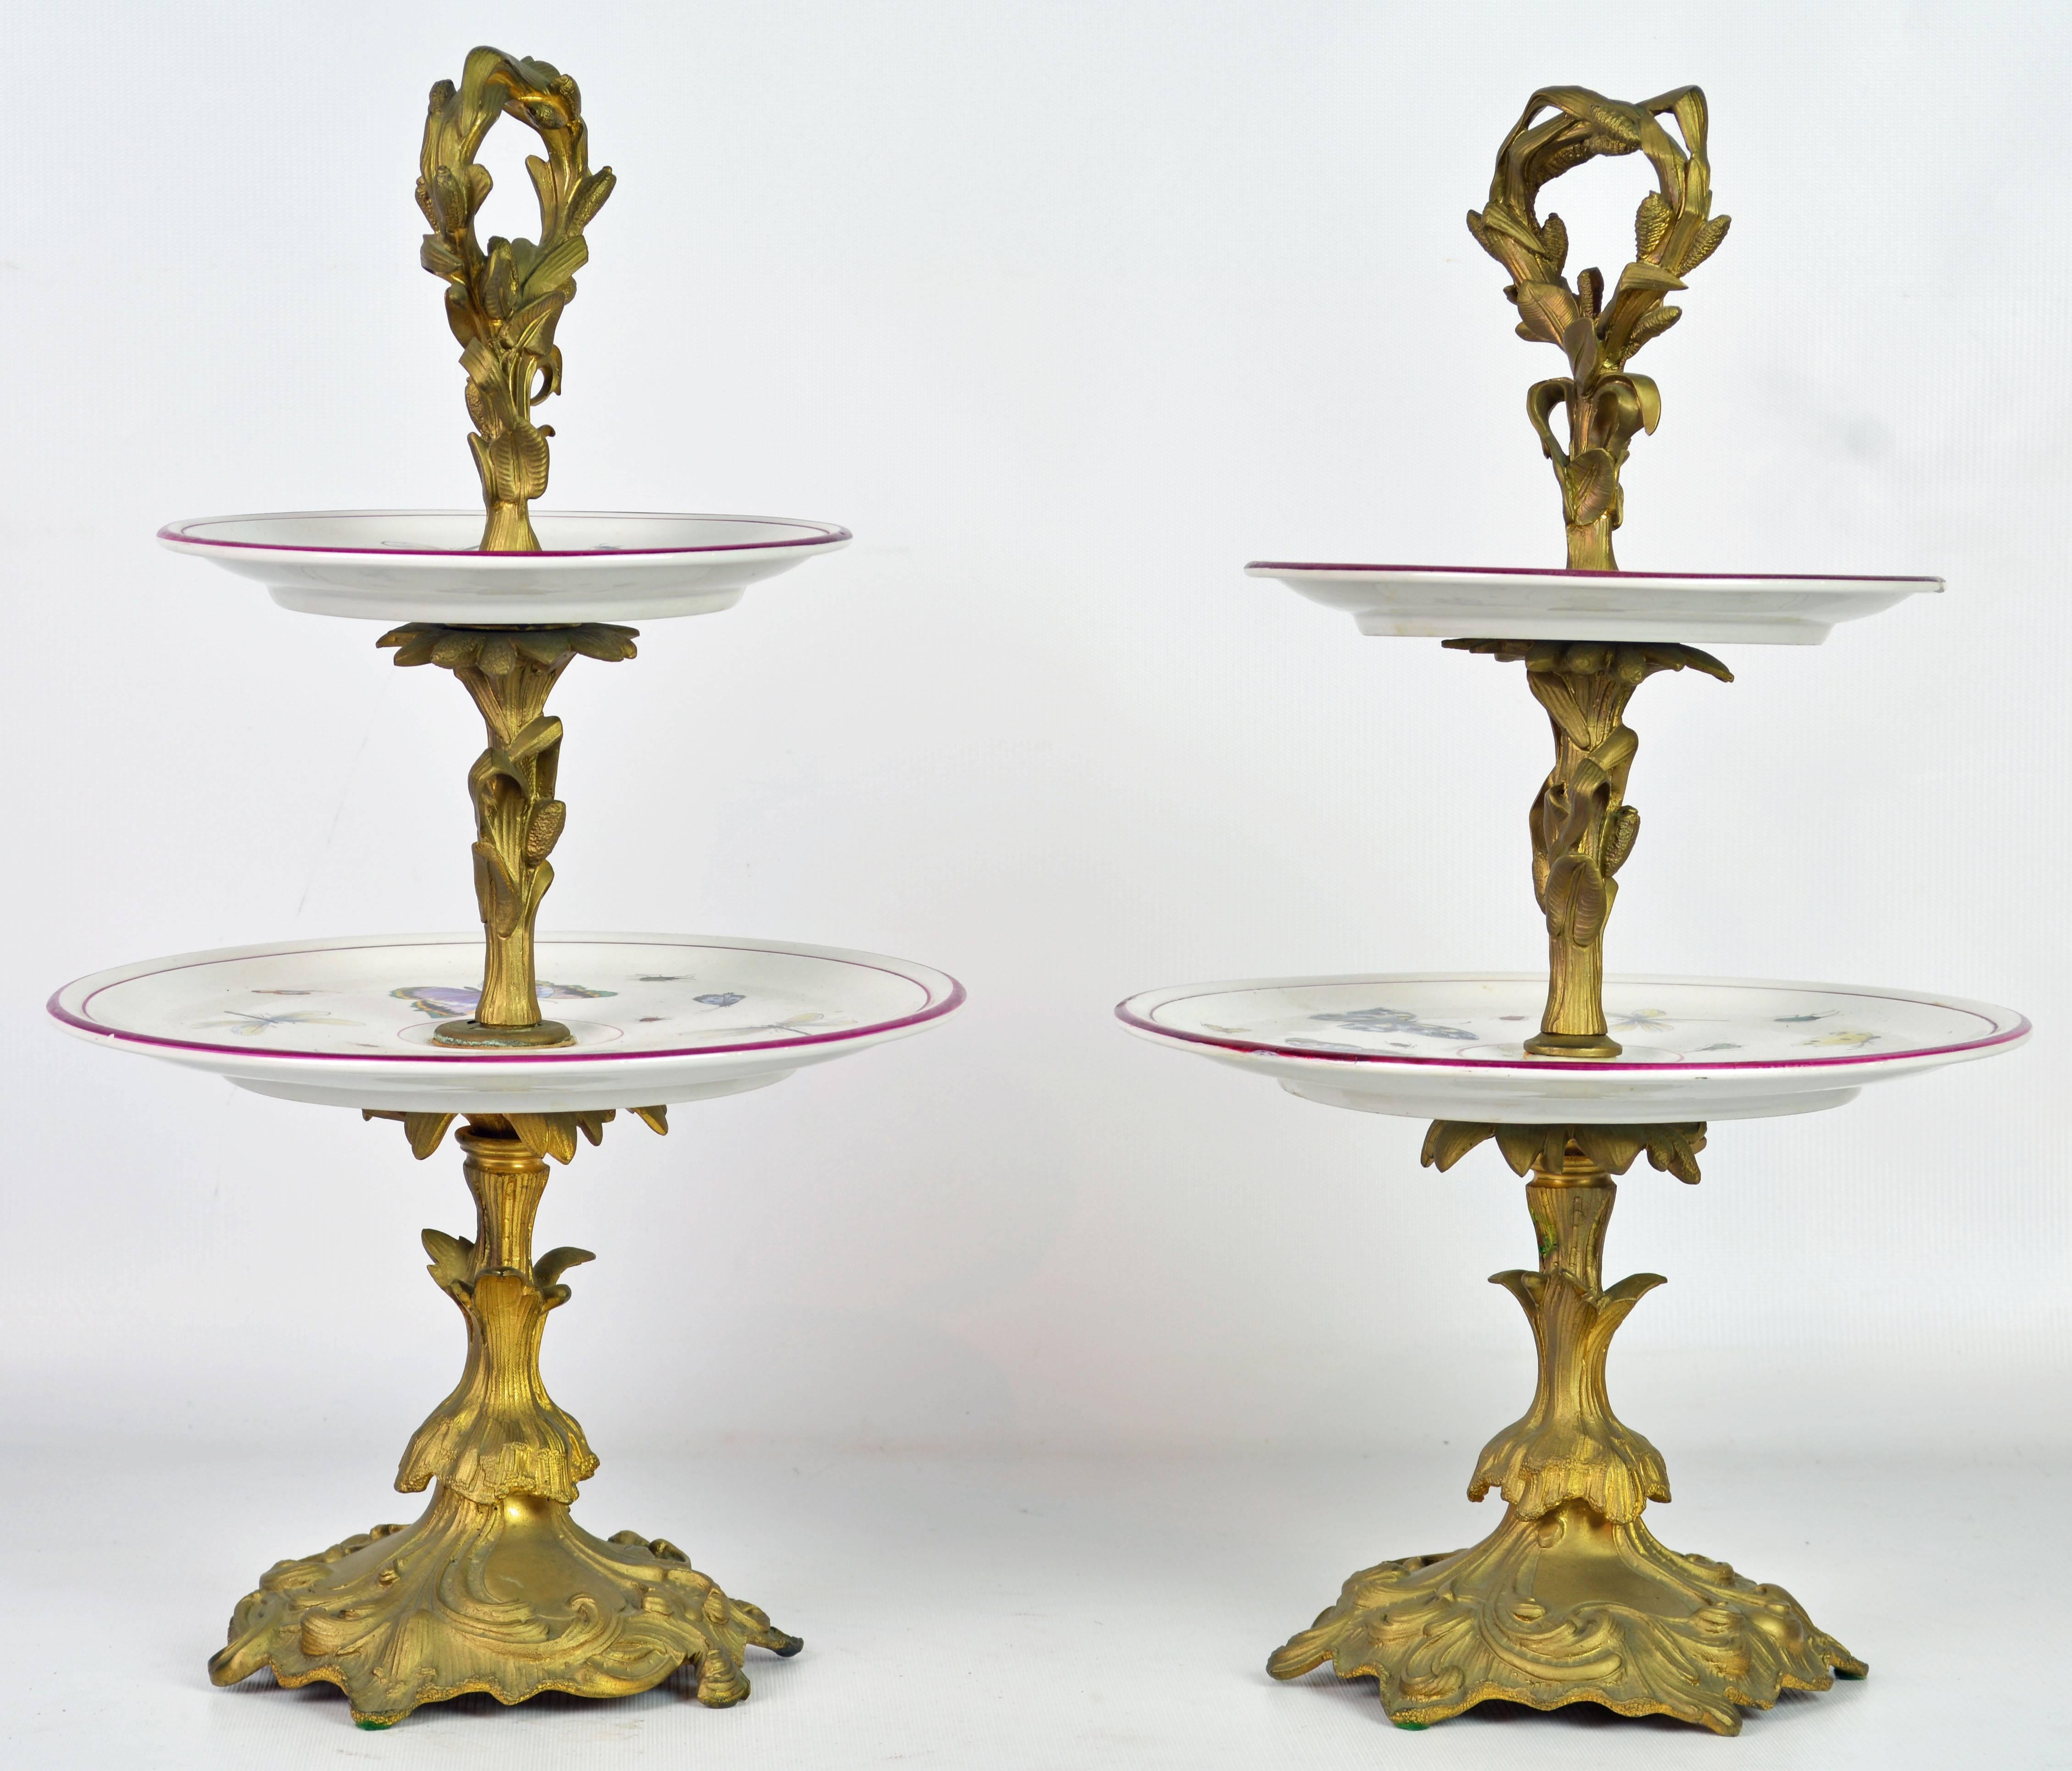 A lovely and unusual pair of almost 18 inches tall rococo or Louis XV style two-tier gilt bronze dessert stands with Old Paris porcelain tiers decorated with butterflies, dragonflies and insects.